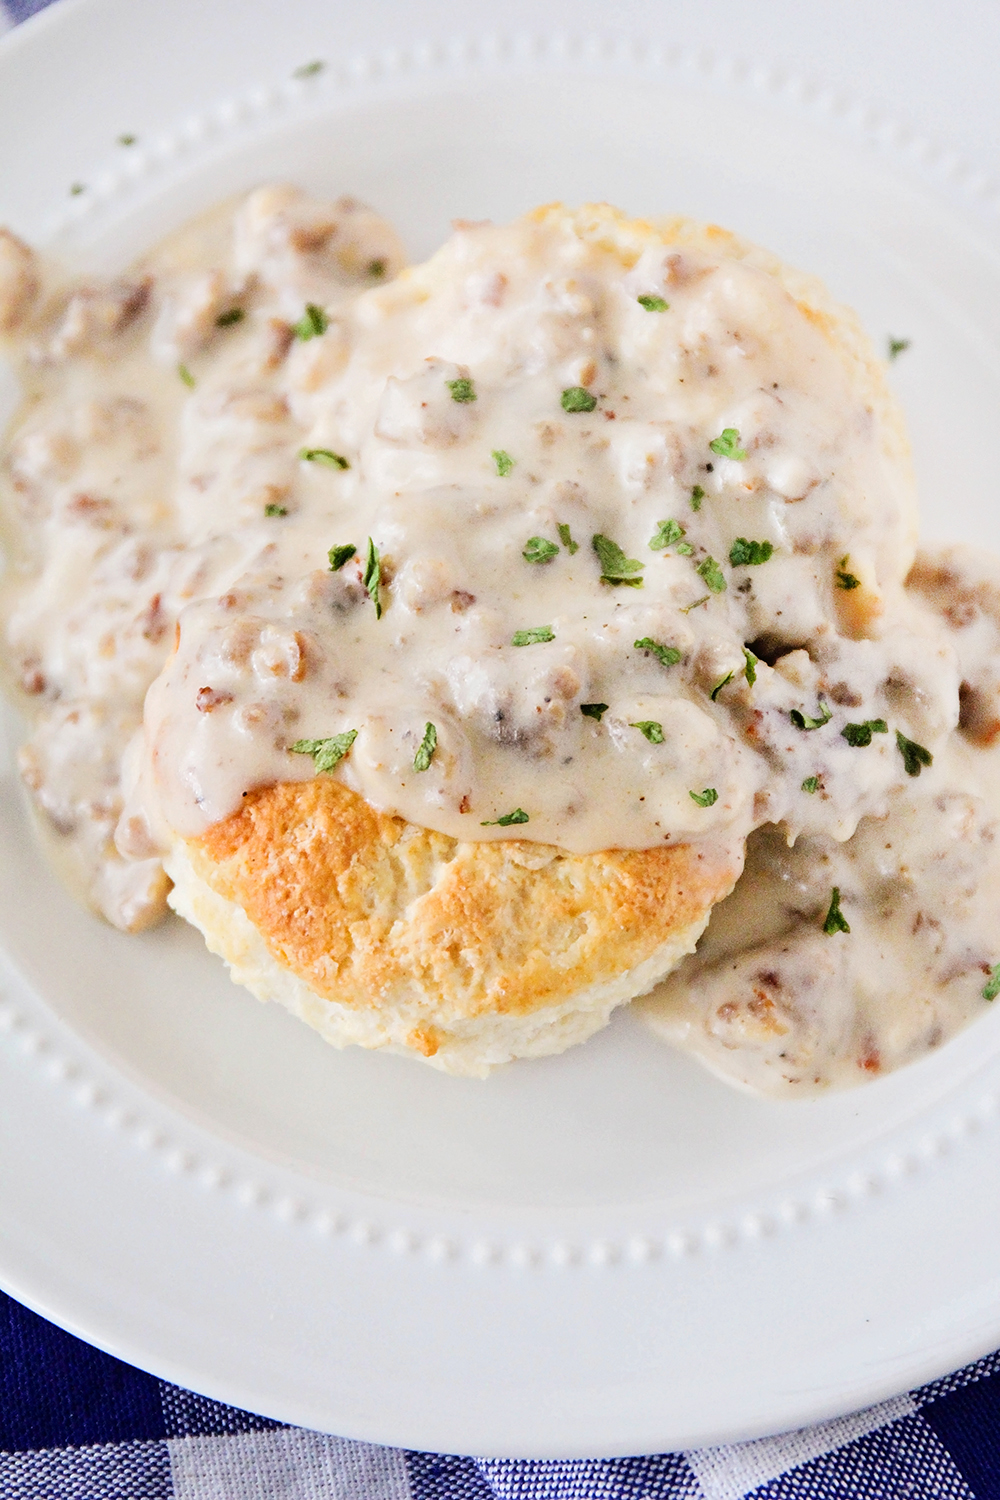 This delicious biscuits and gravy recipe is so easy to make, and so filling. It's a hearty breakfast that the whole family will love!